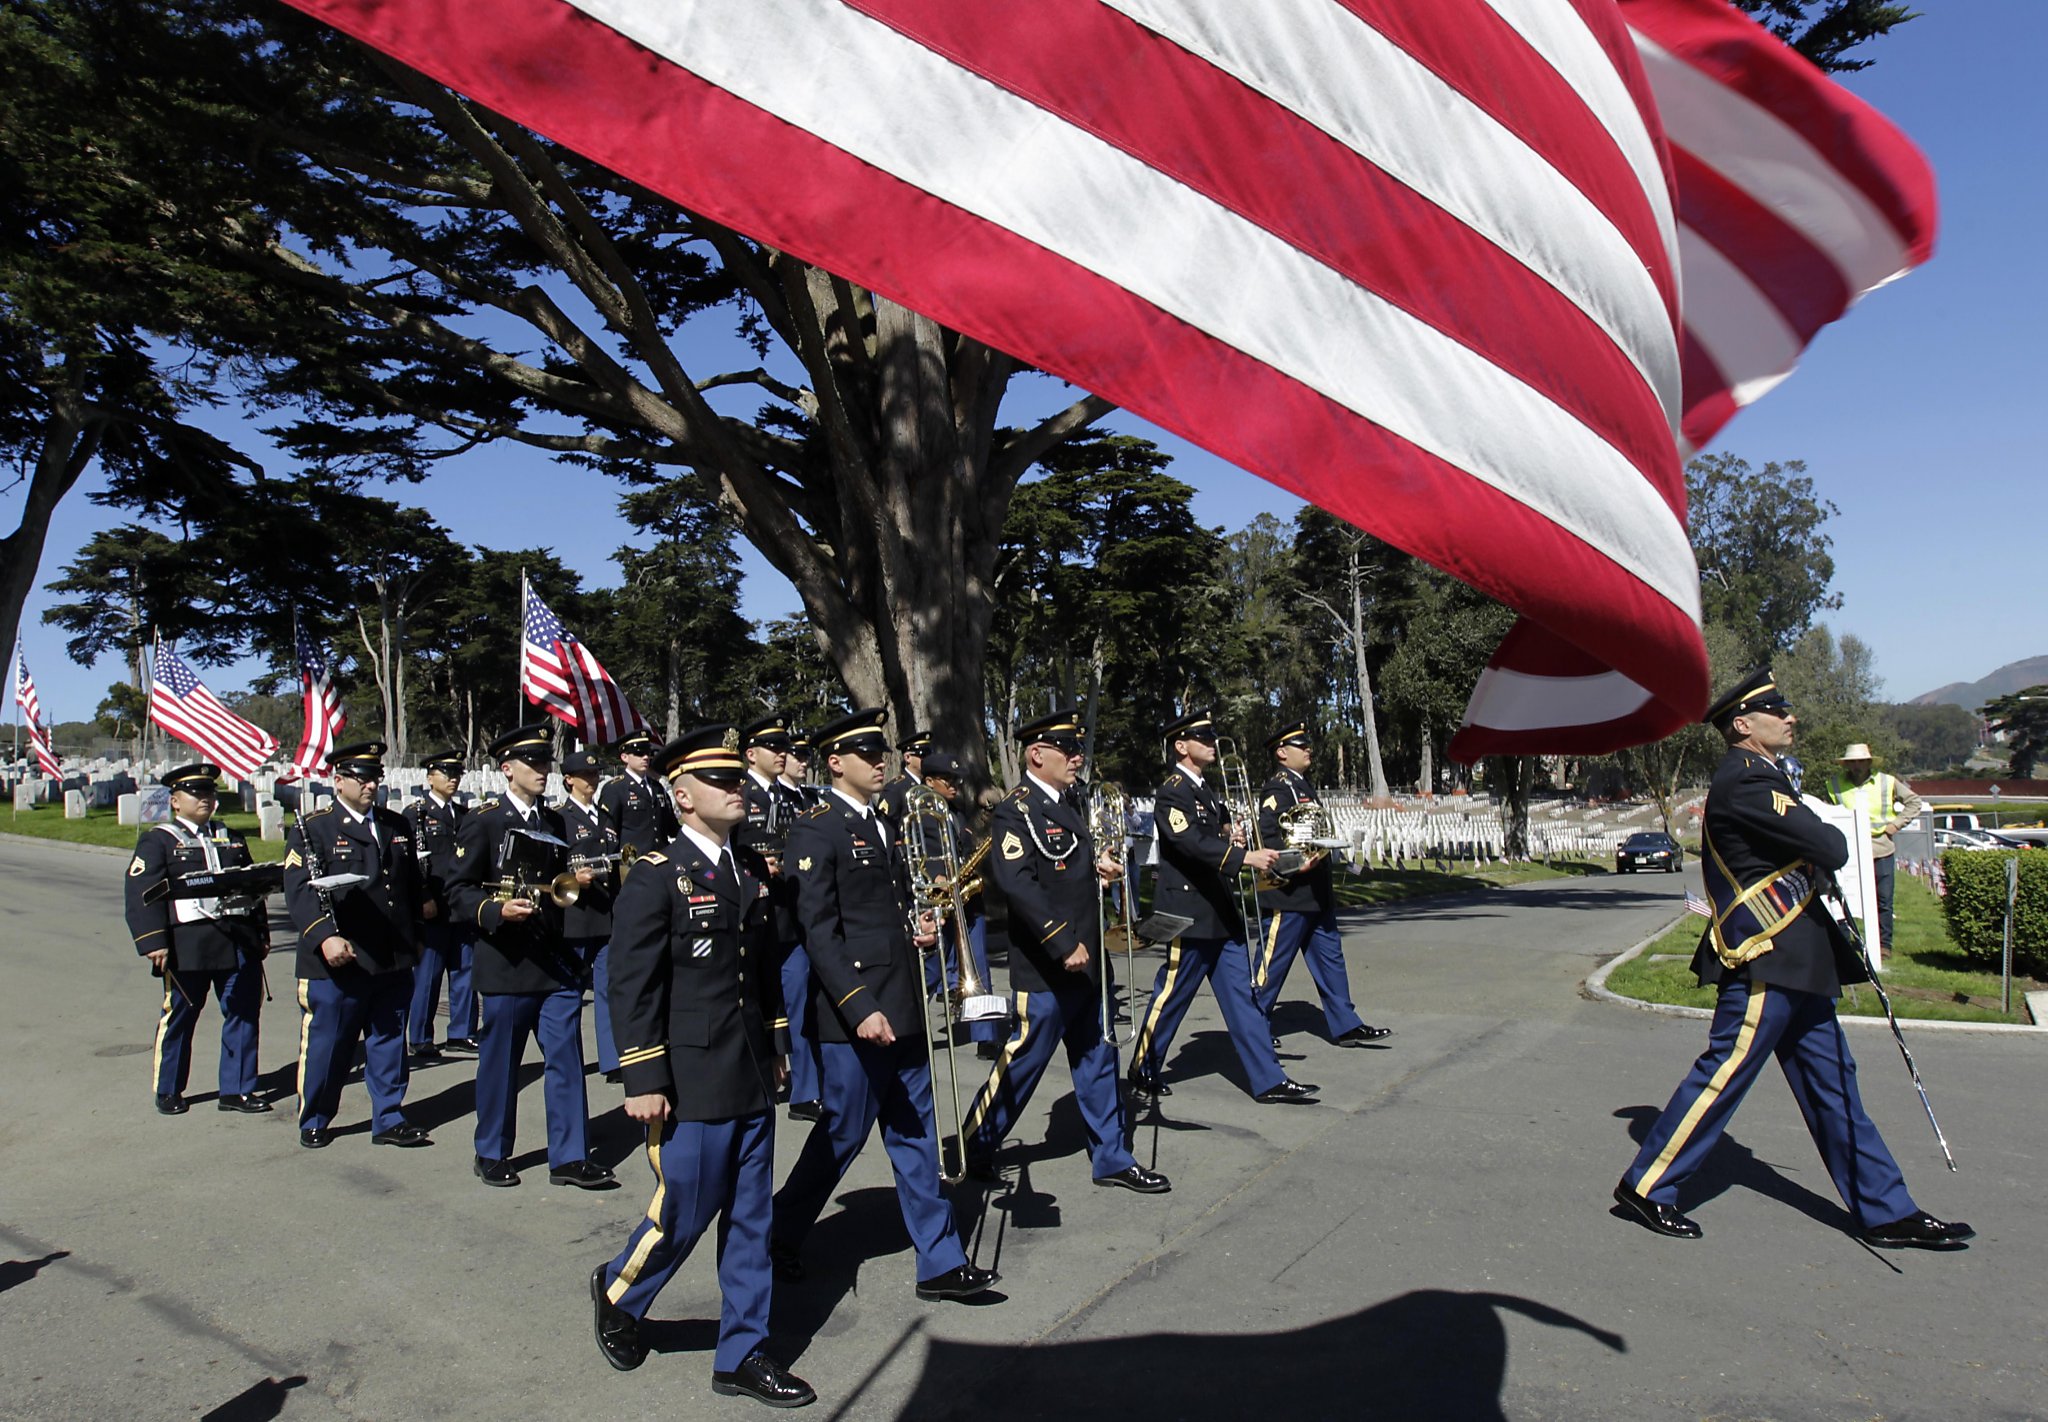 Things to do in the Bay Area during Memorial Day weekend